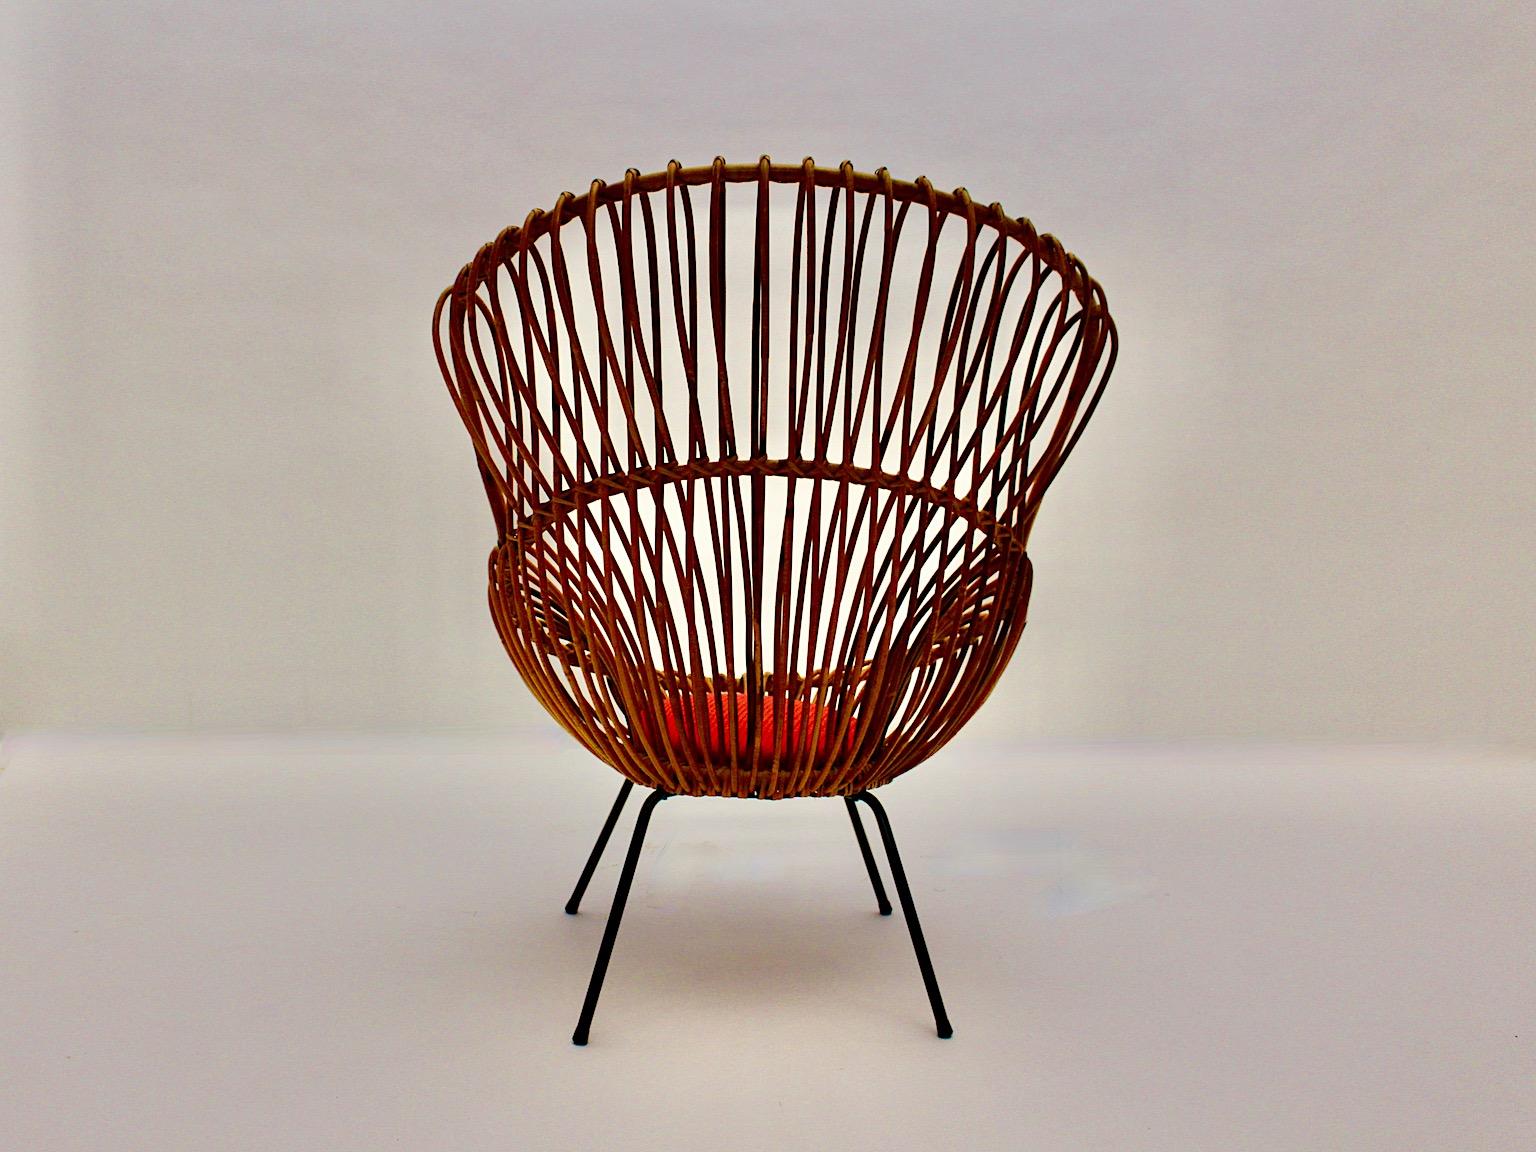 Organic Riviera Style Vintage Rattan Lounge Chair Franco Albini 1950s Italy For Sale 4